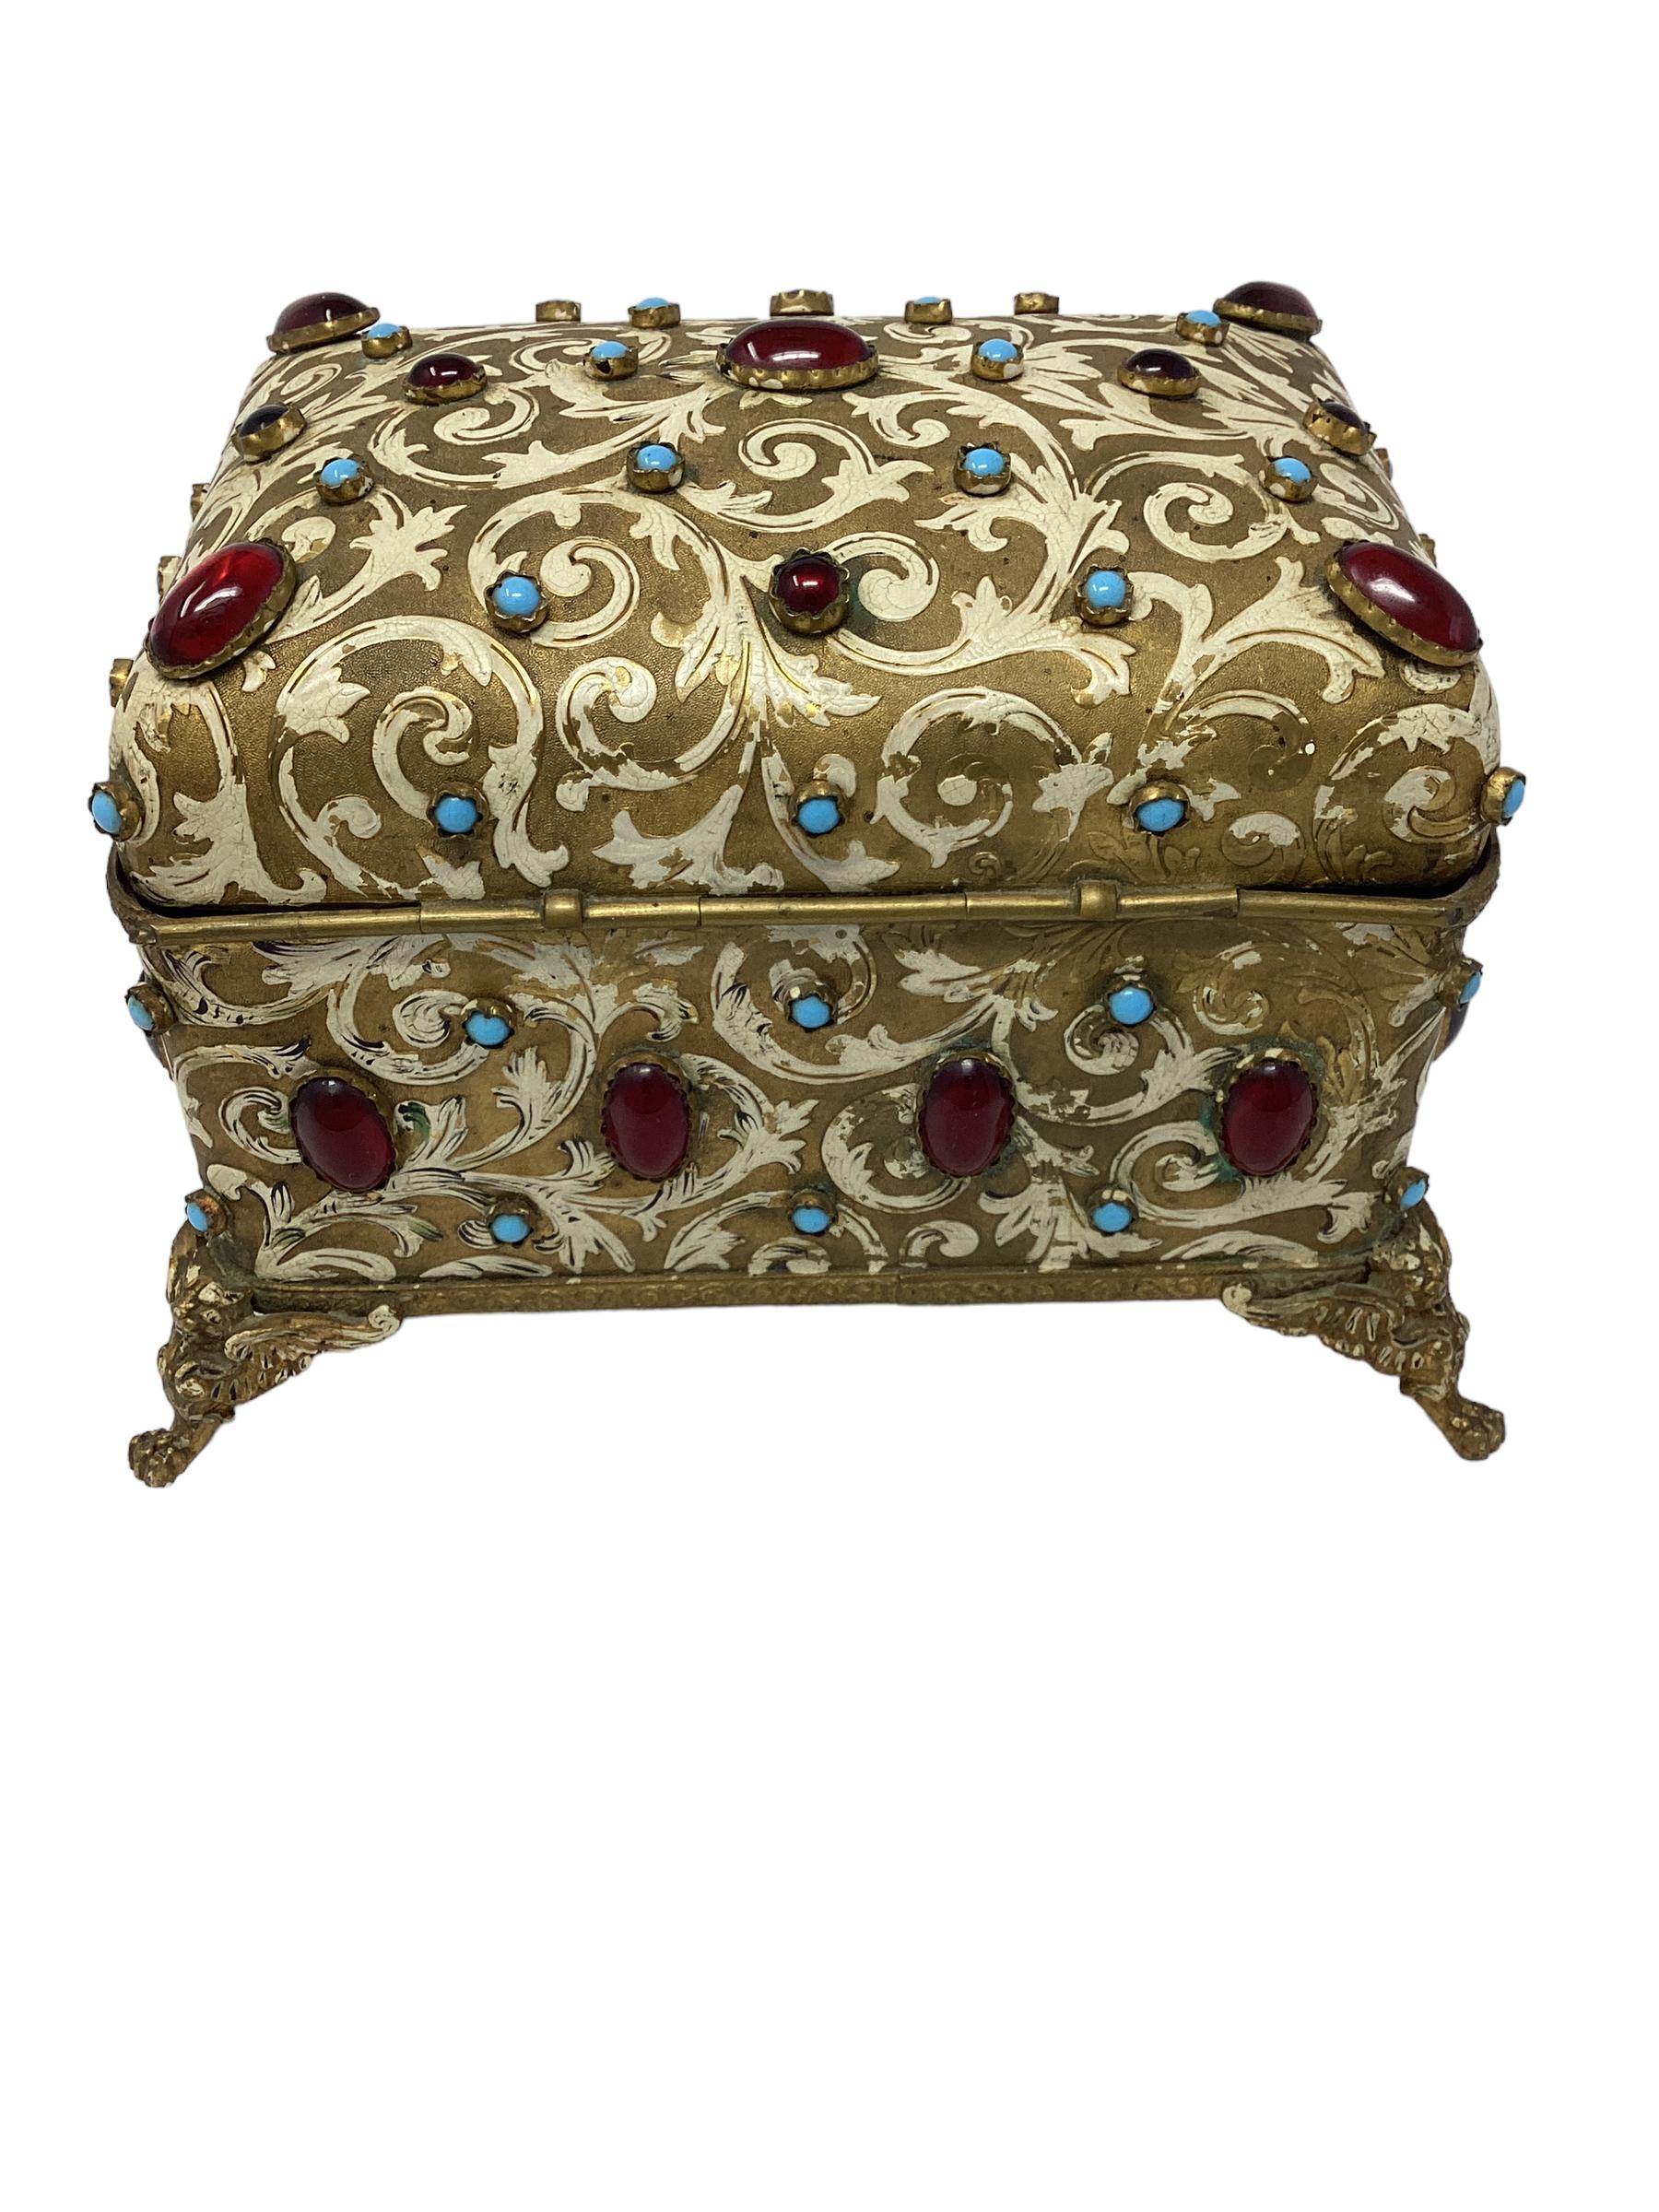 Antique Jewel Encrusted Gilt Bronze Dome Top Box. Gilt bronze box is decorated  enameled finish with and colored cabochon jewels in ruby red and blue glass. The box sits on a winged cat raised on claw feet. Definitely a one of a kind box. The